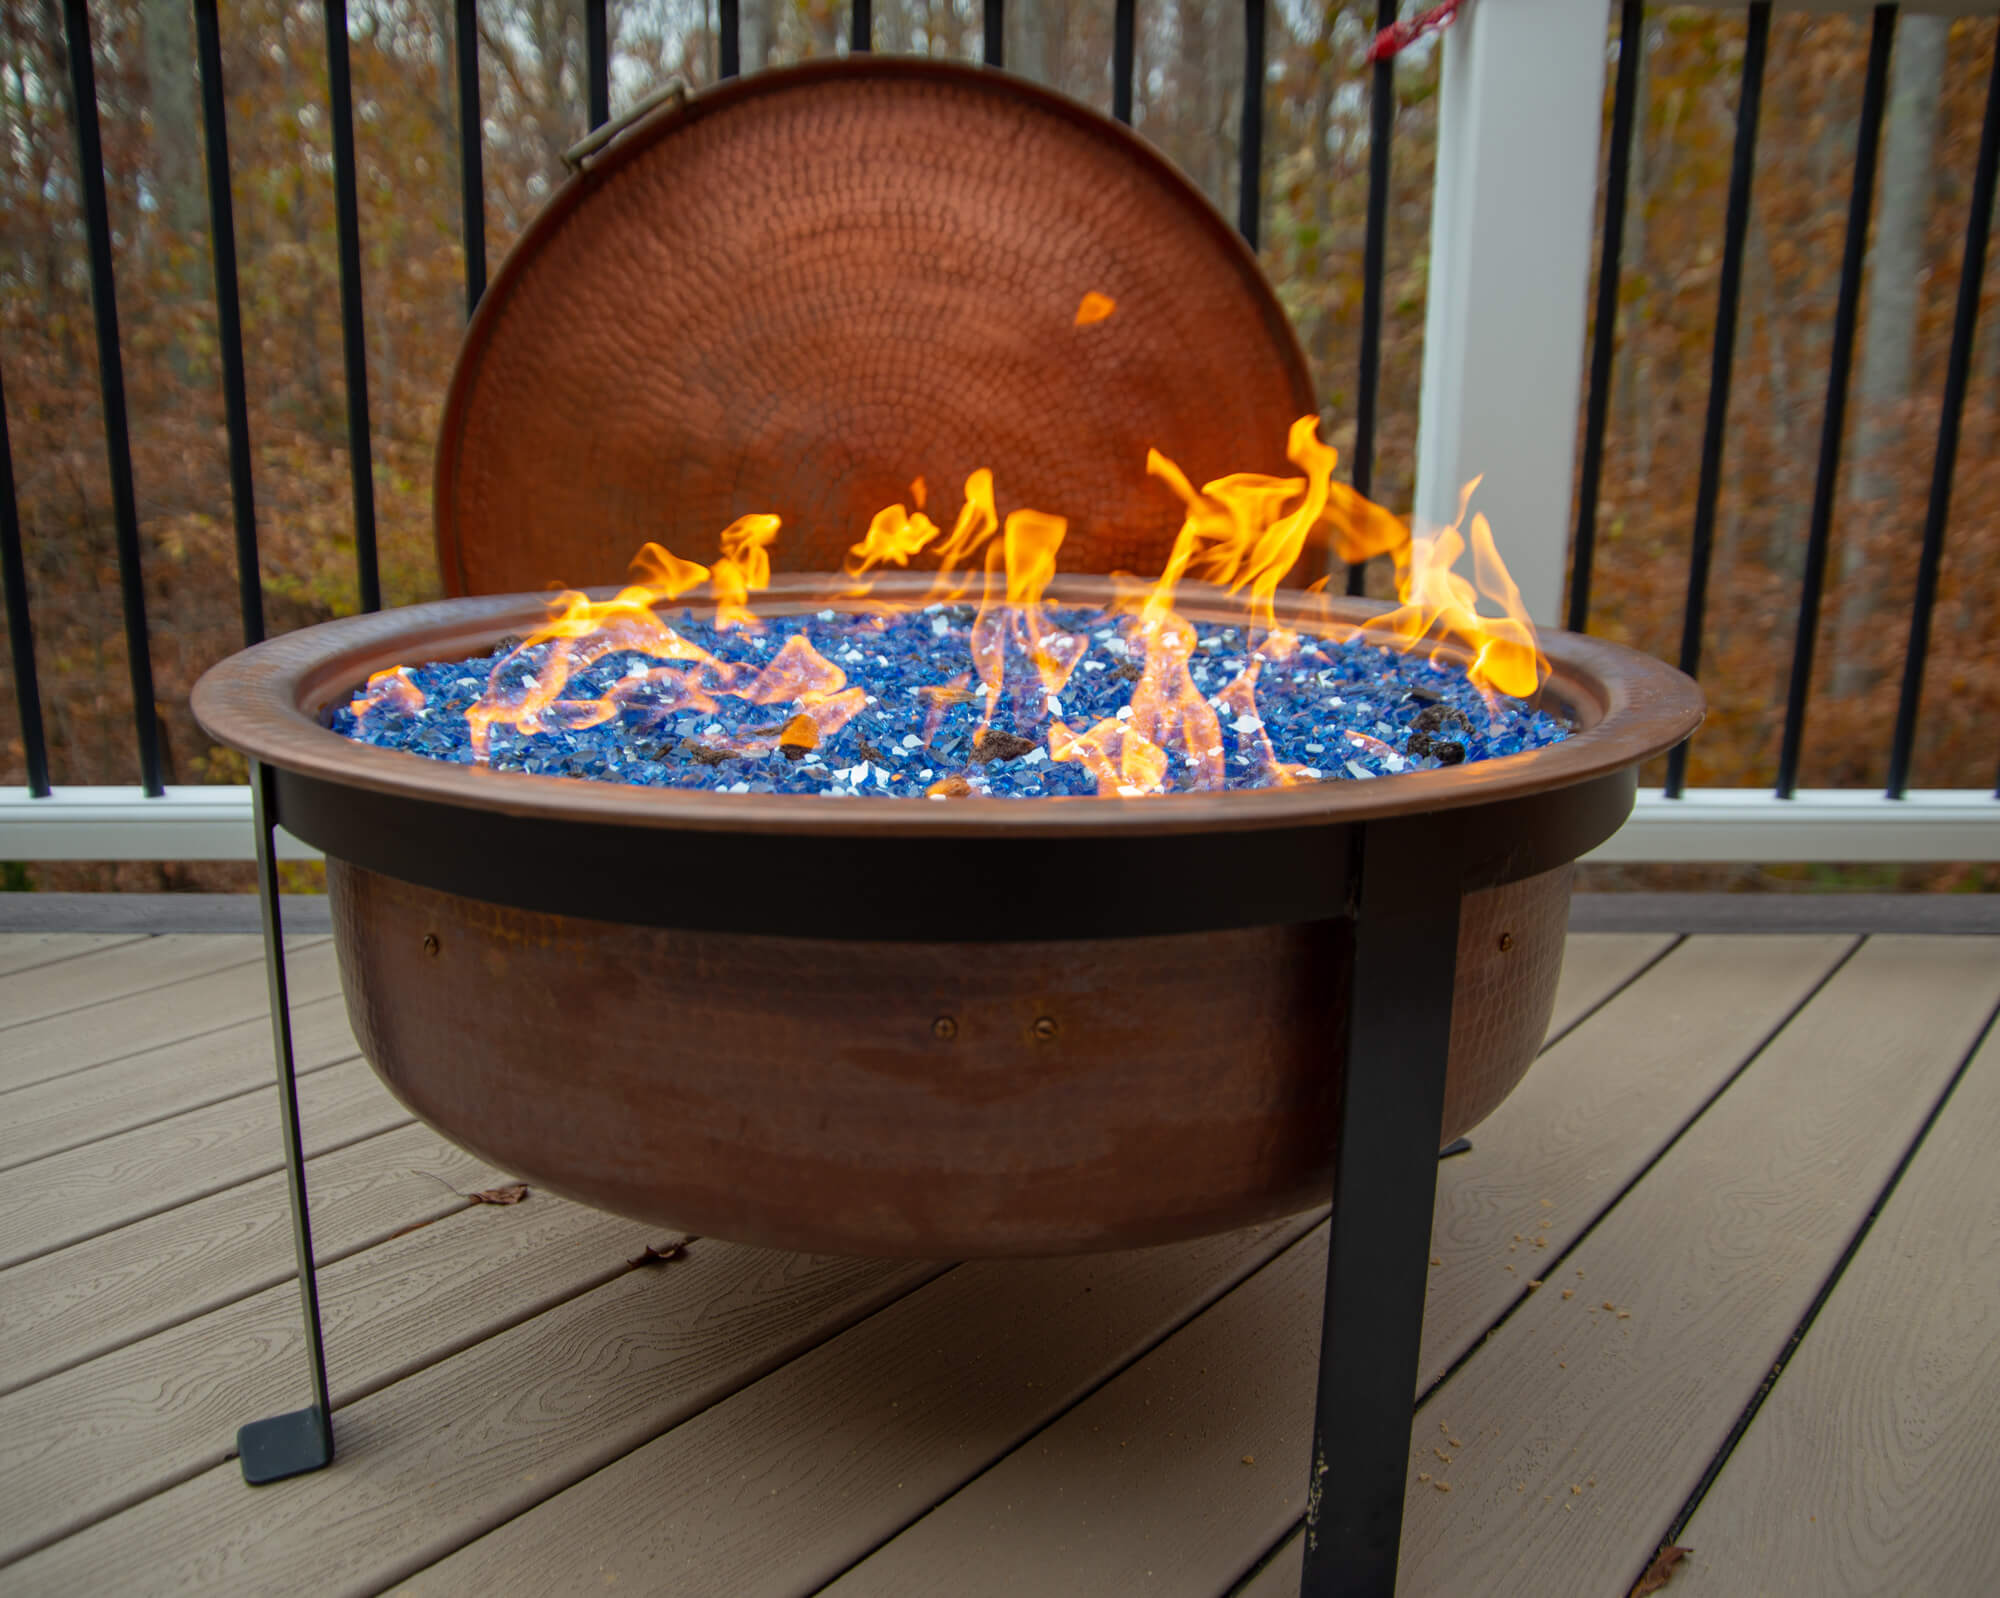 6 Ways To Put A Fire Pit On Wooden Deck, Are Propane Fire Pits Safe On Decks